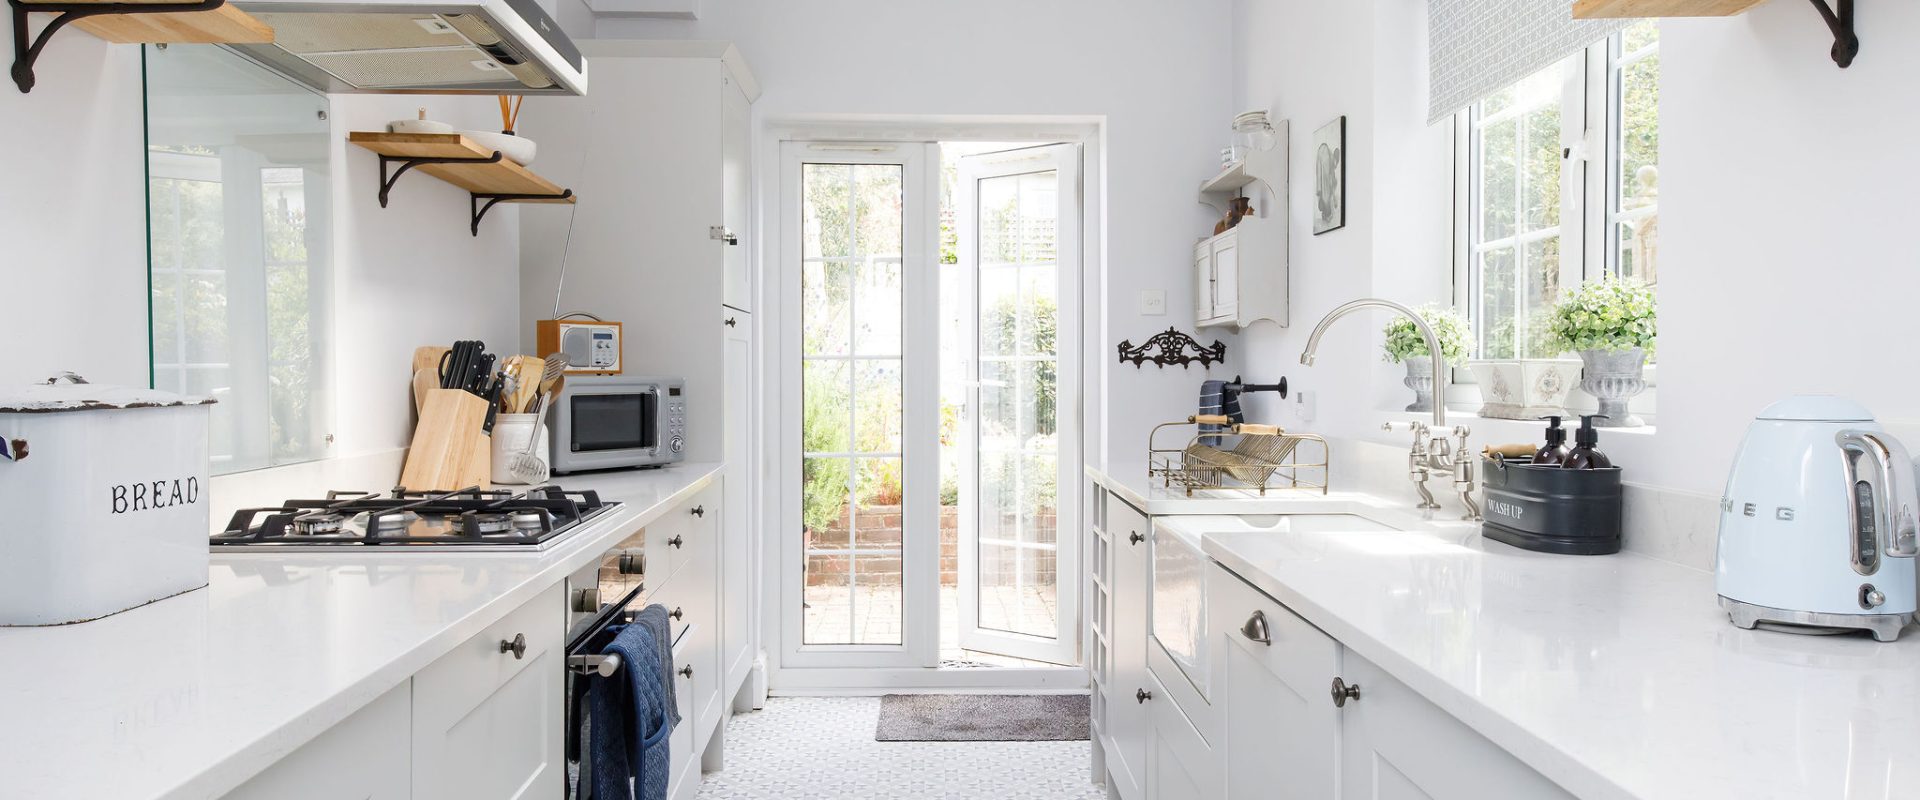 Kitchen Holiday Home | Simple Getaway